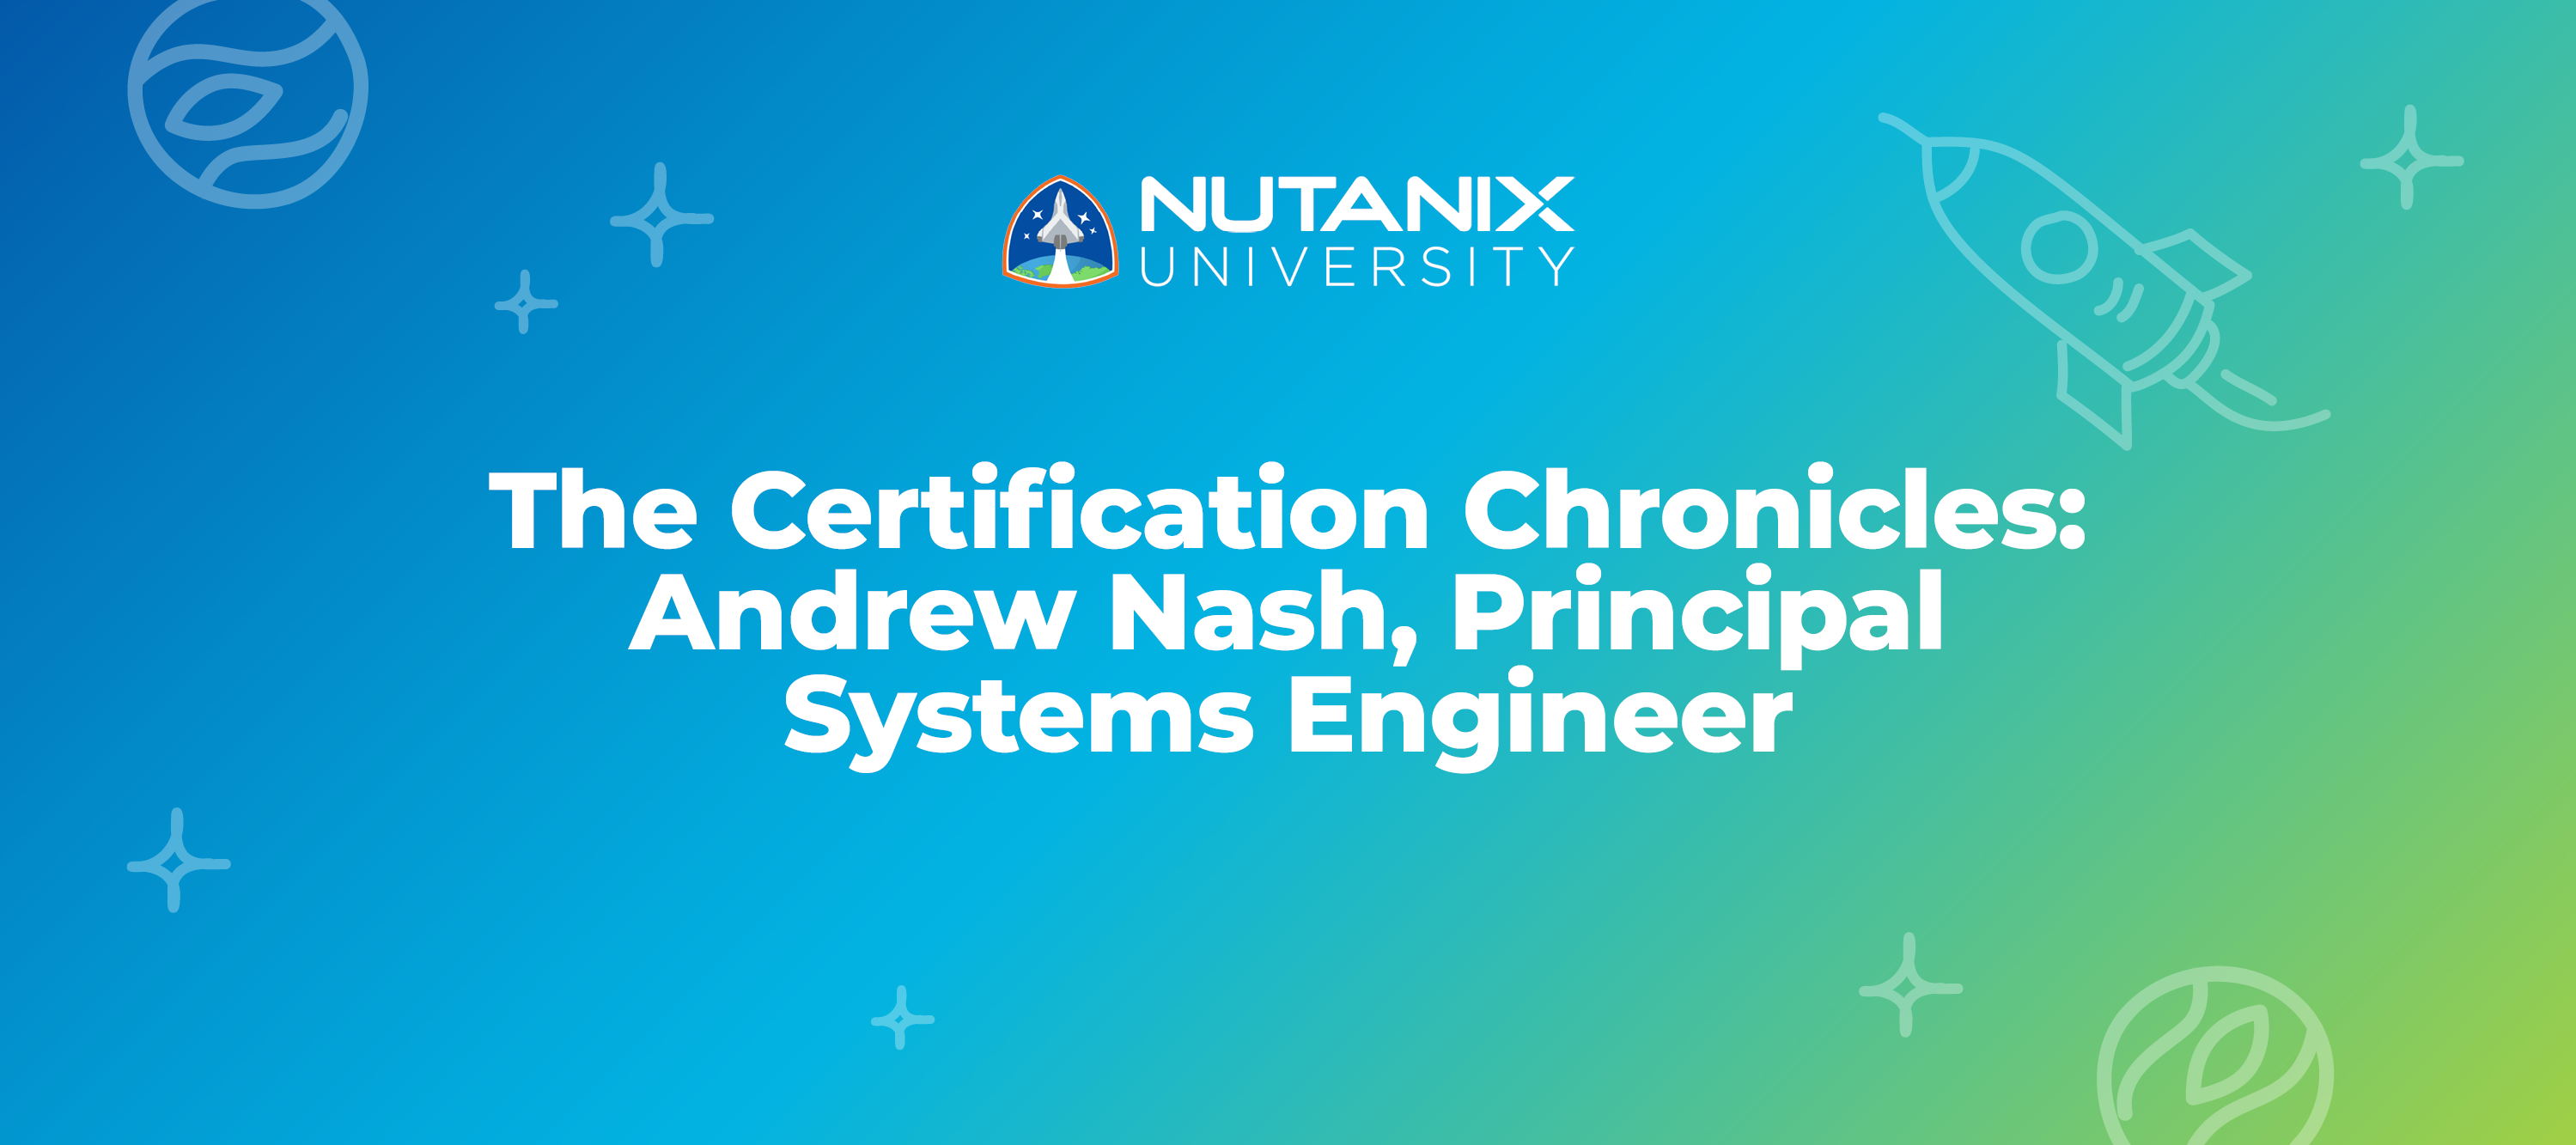 The Certification Chronicles: Andrew Nash, Principal Systems Engineer